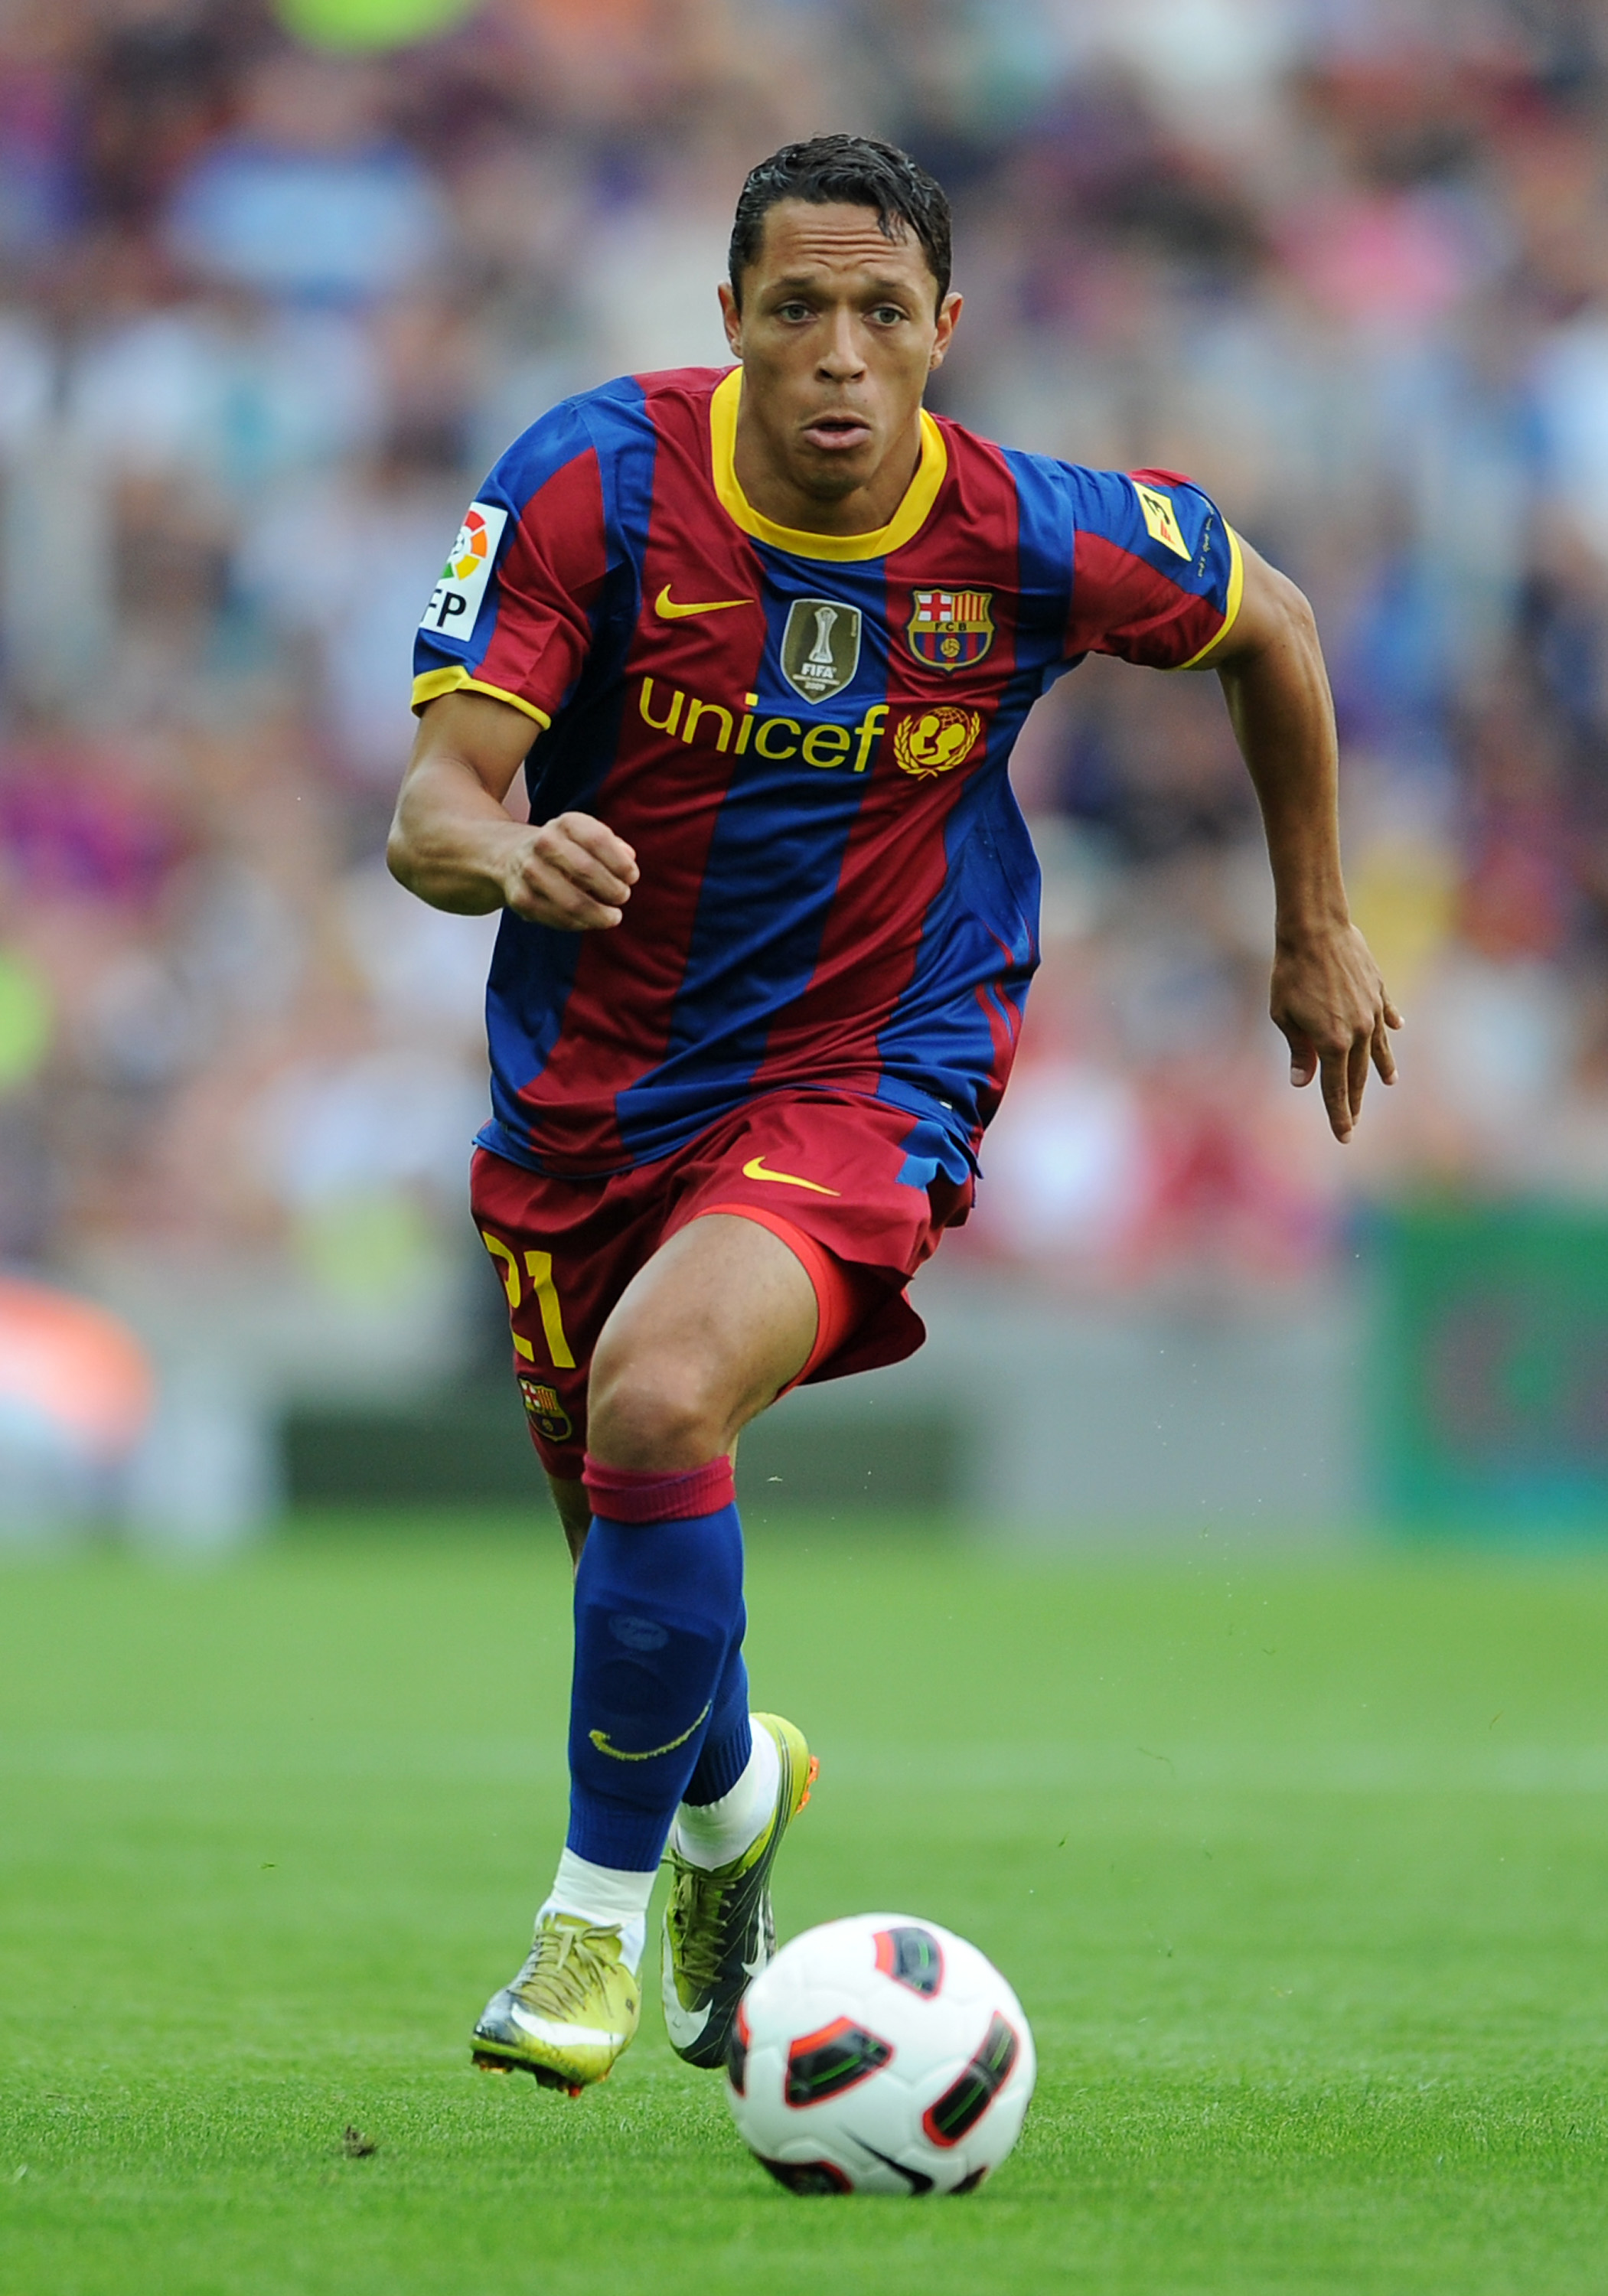 BARCELONA, SPAIN - SEPTEMBER 11:  Adriano of Barcelona runs with the ball during the La Liga match between Barcelona and Hercules at the Camp Nou stadium on September 11, 2010 in Barcelona, Spain. Barcelona lost the match 2-0.  (Photo by Jasper Juinen/Get